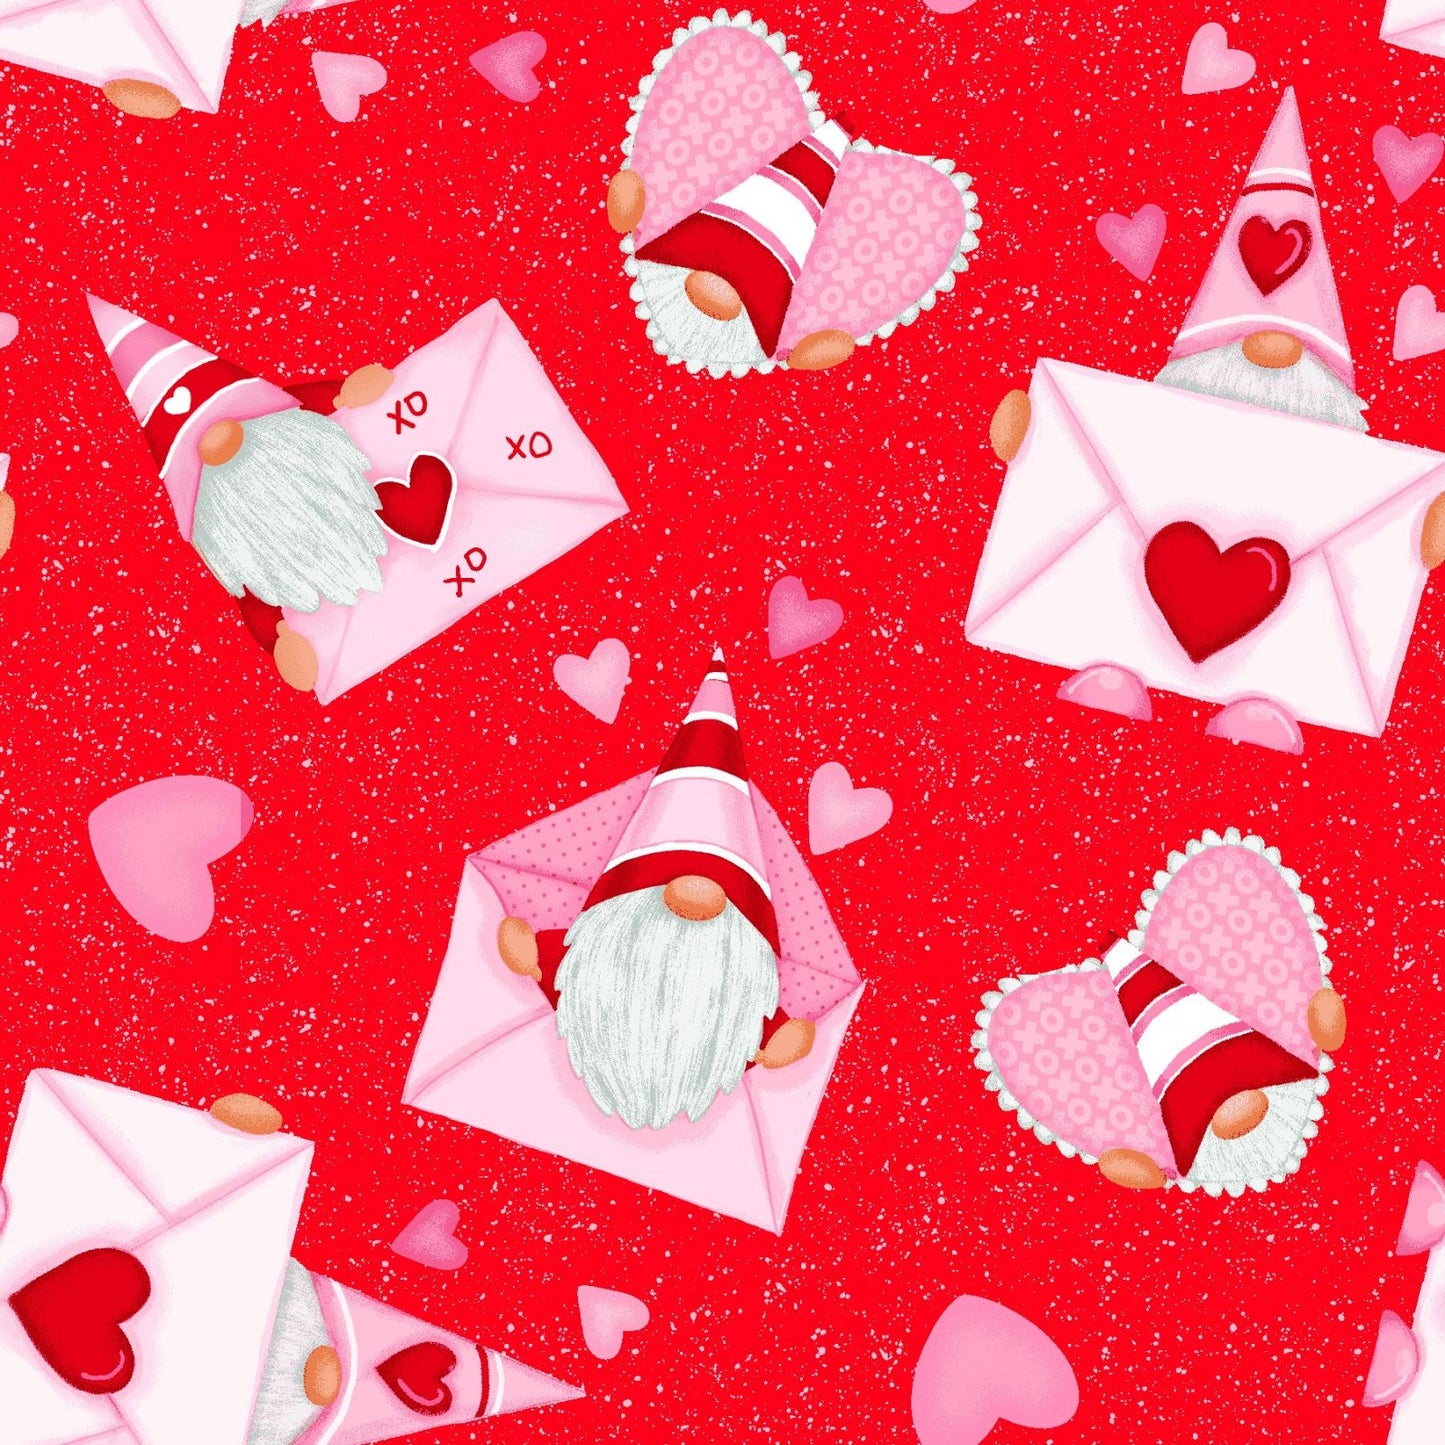 44 x 36 Pink Gnomes with envelopes on Red 100% Cotton Valentine